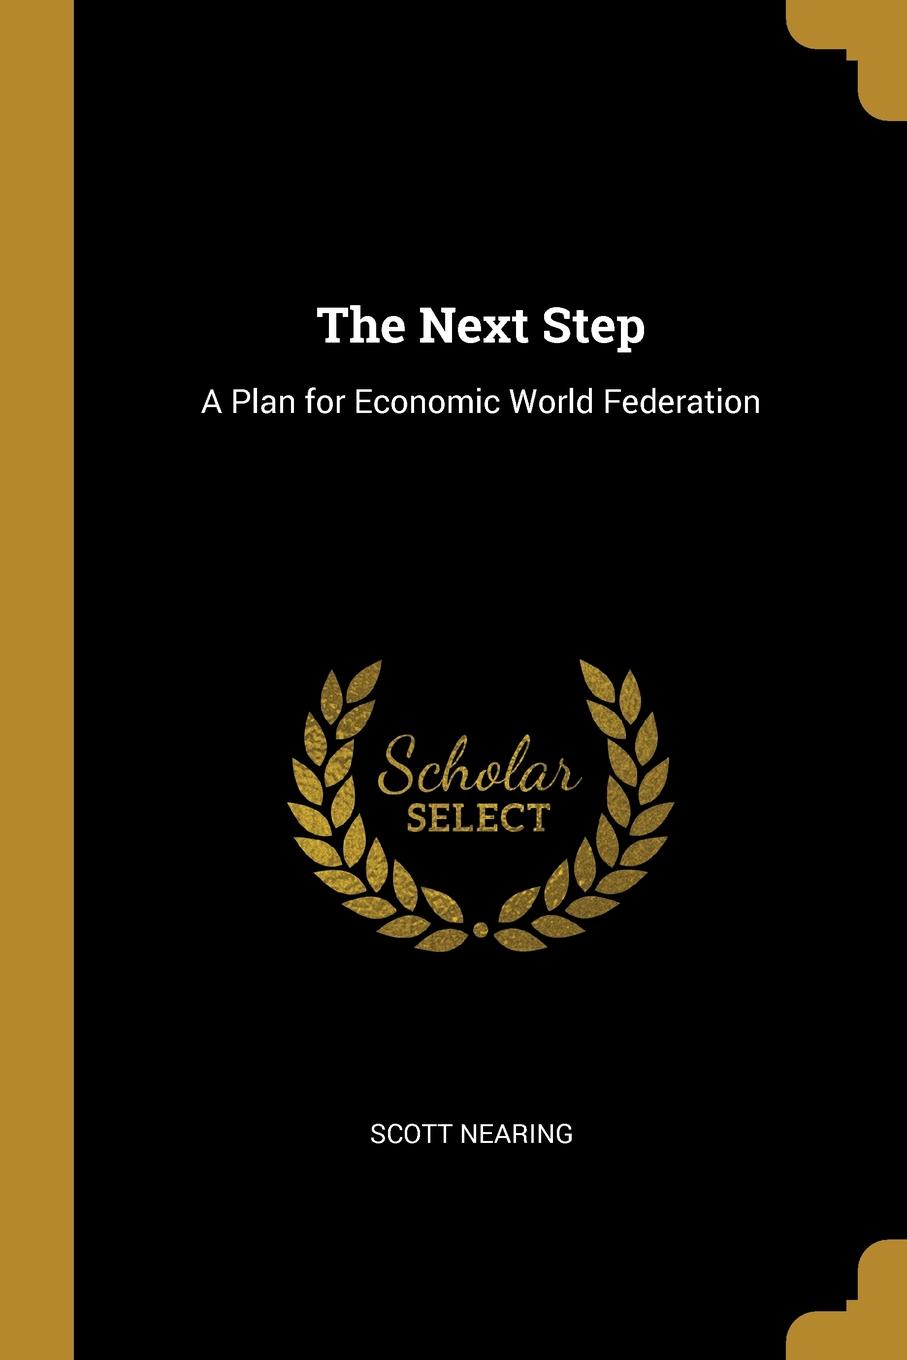 The Next Step. A Plan for Economic World Federation